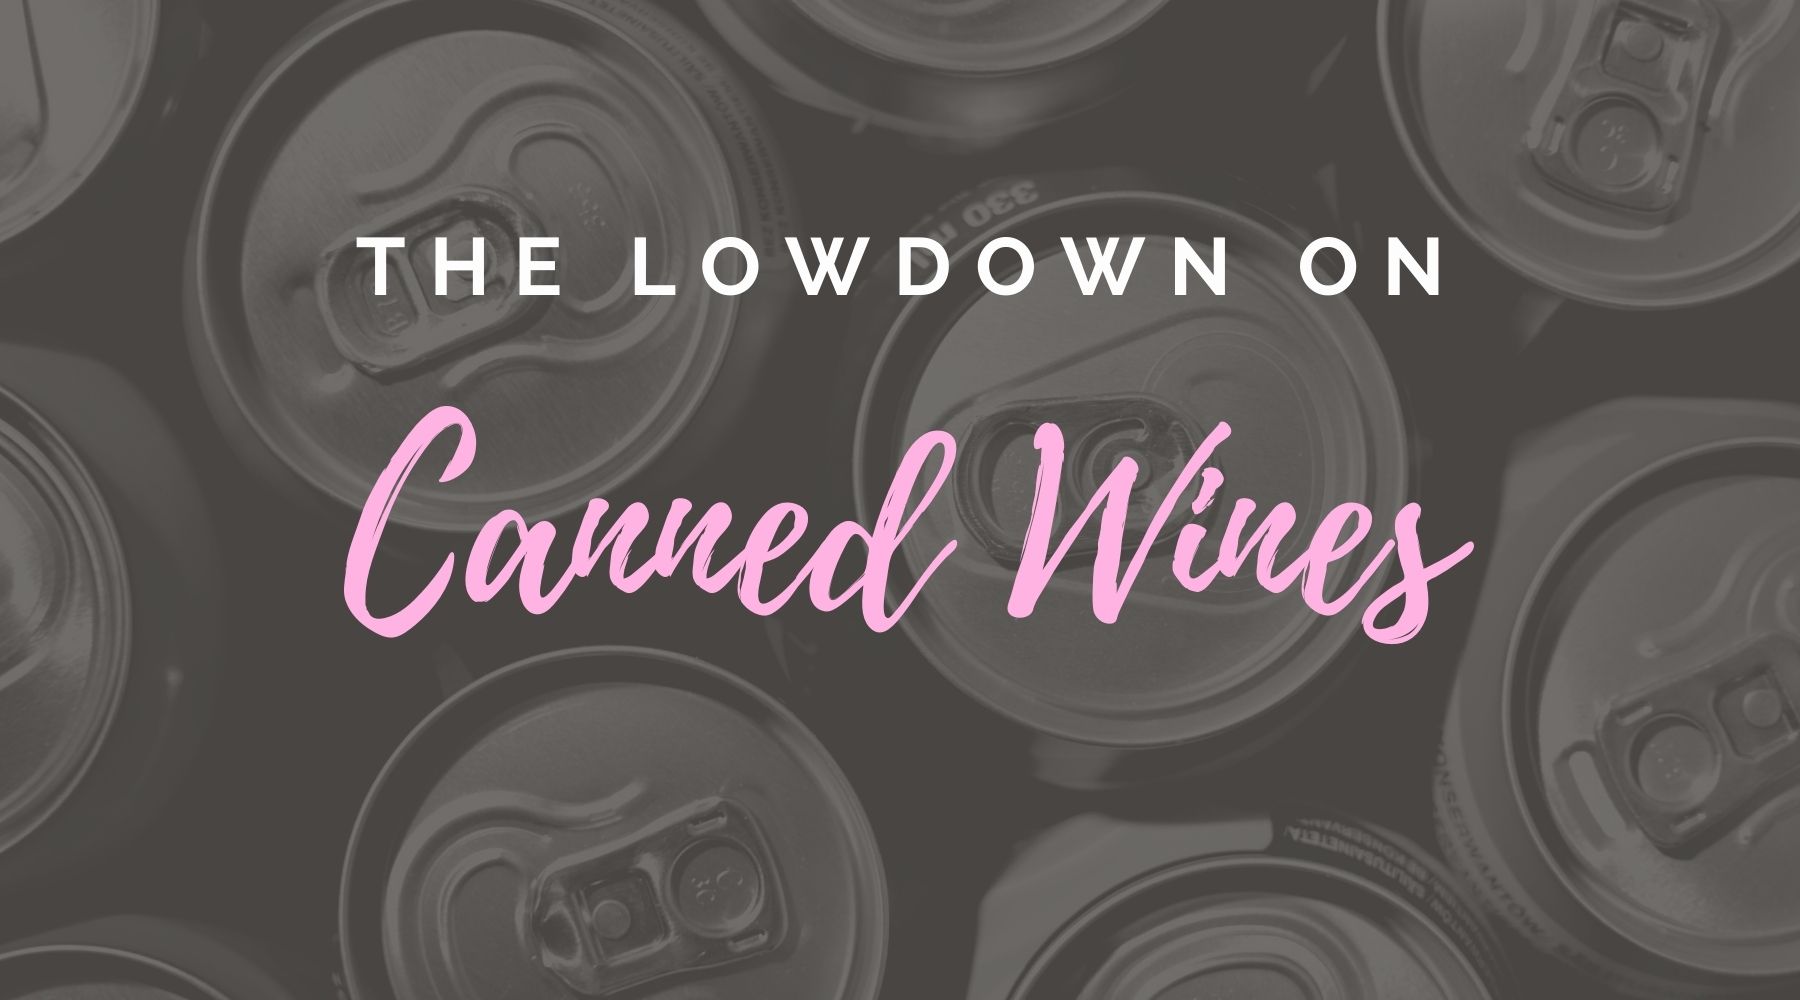 The Lowdown on Canned Wine